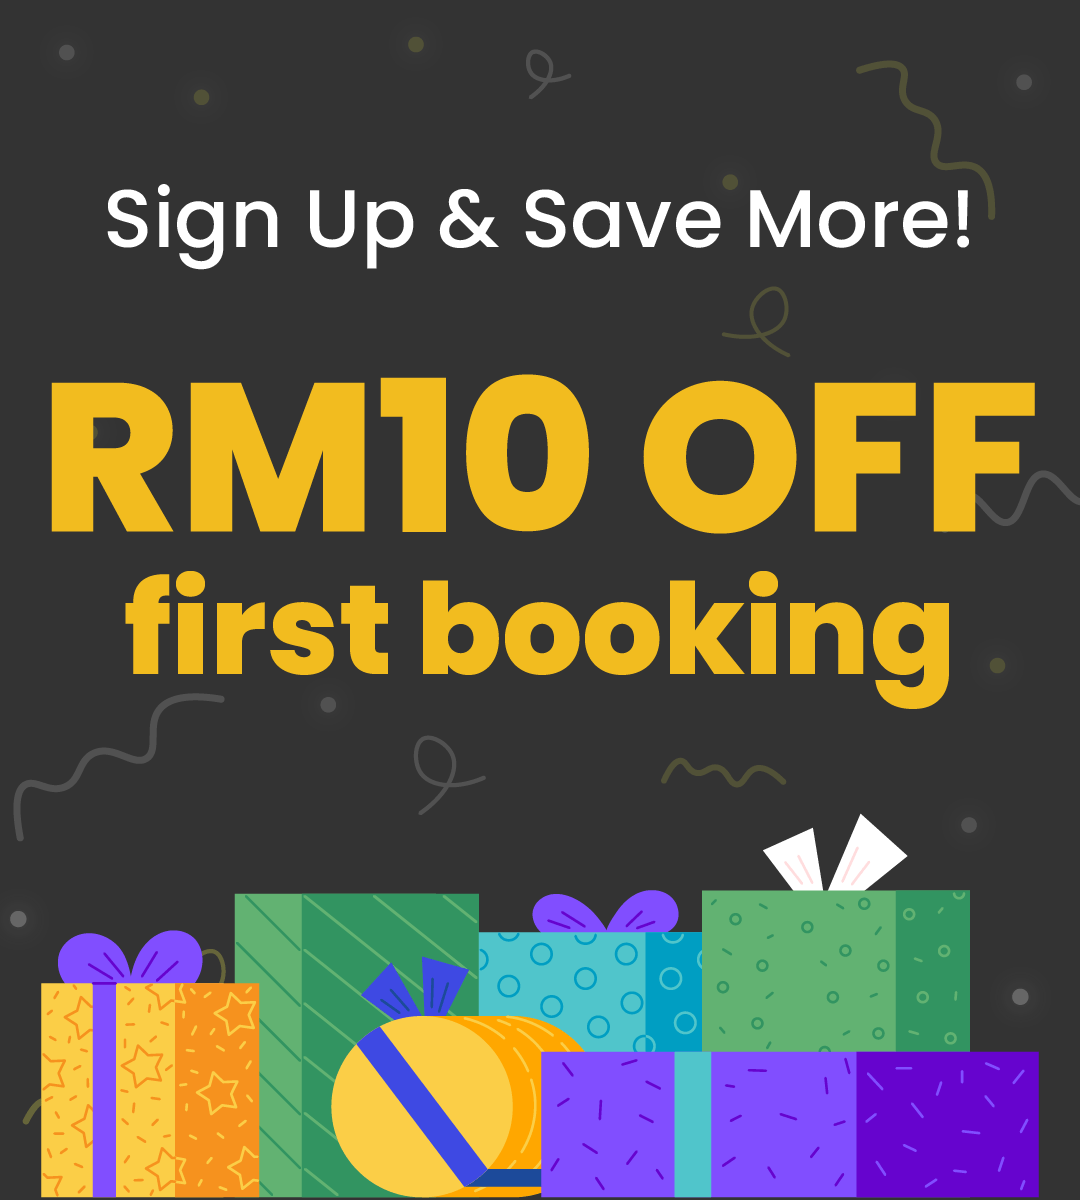 Sign up and get RM10 off your first booking!